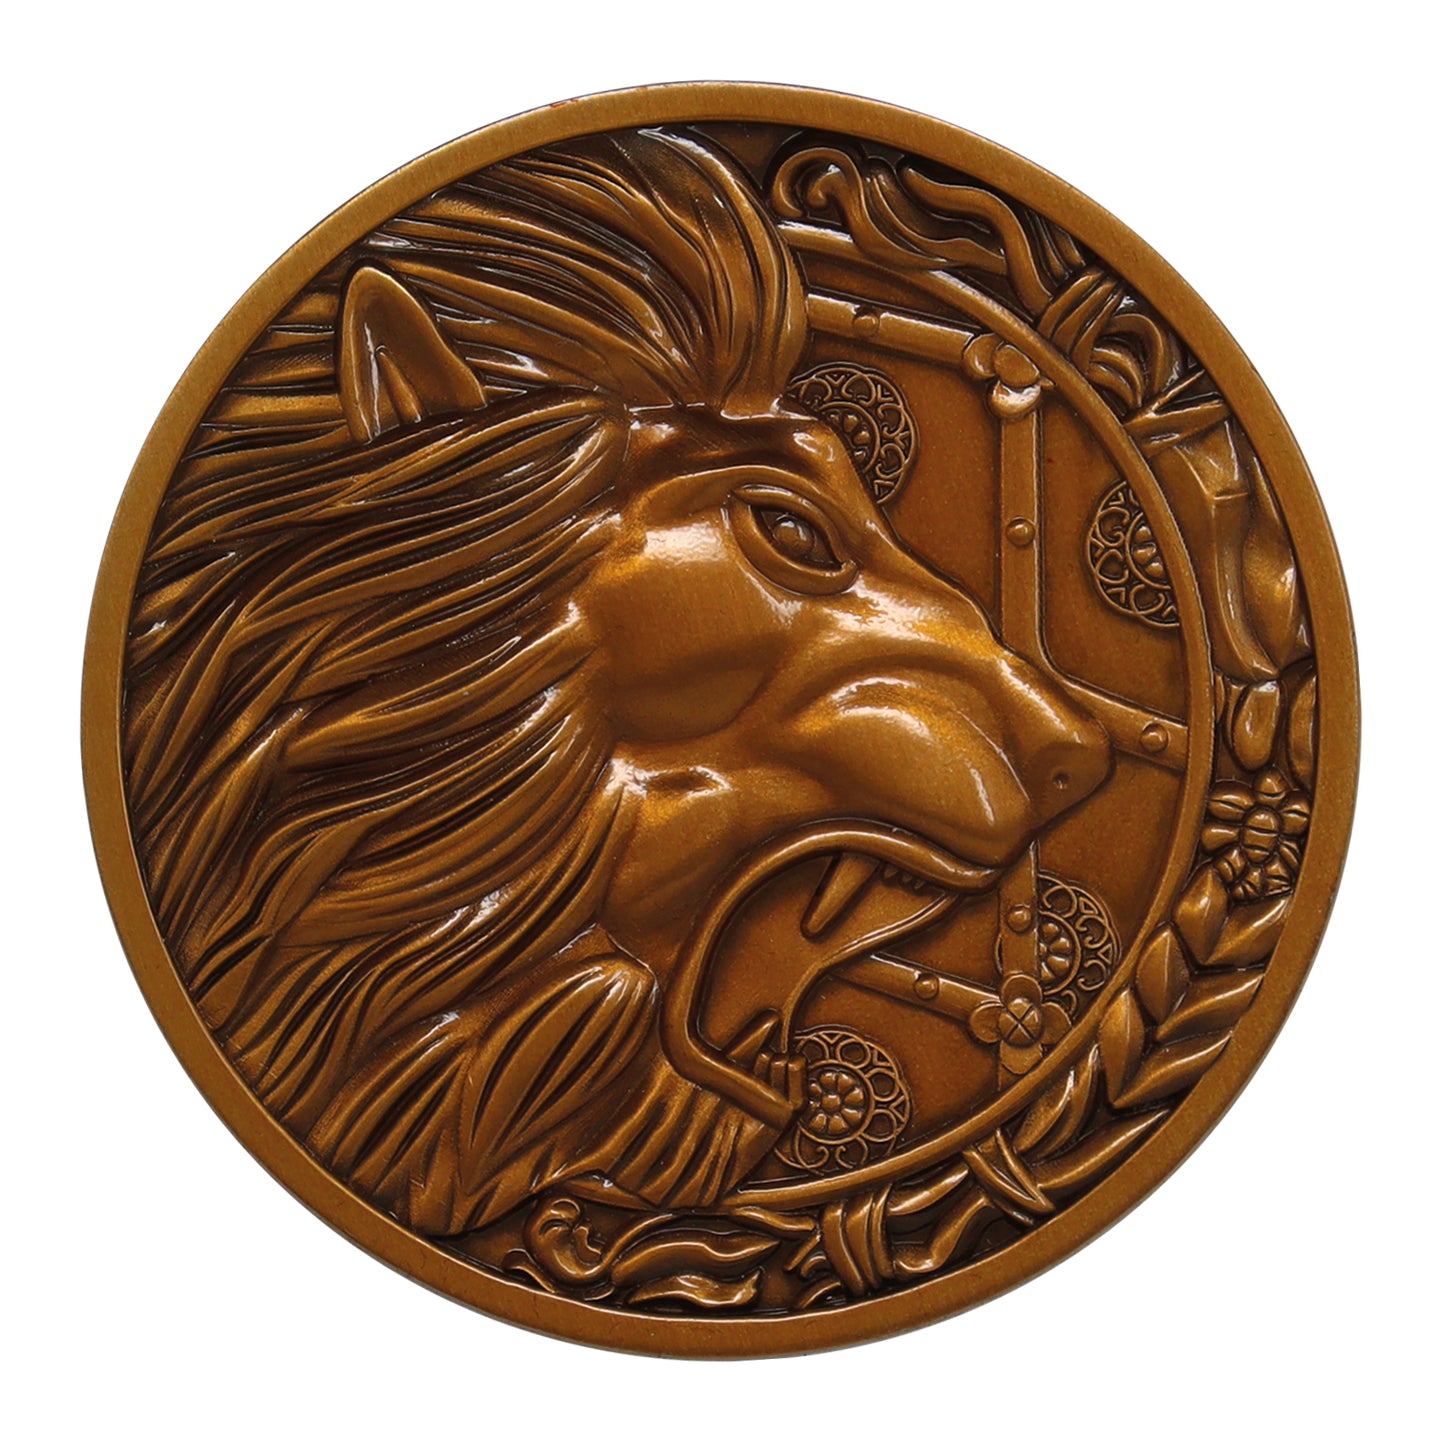 Resident Evil 2 Limited Edition Replica Lion Medallion